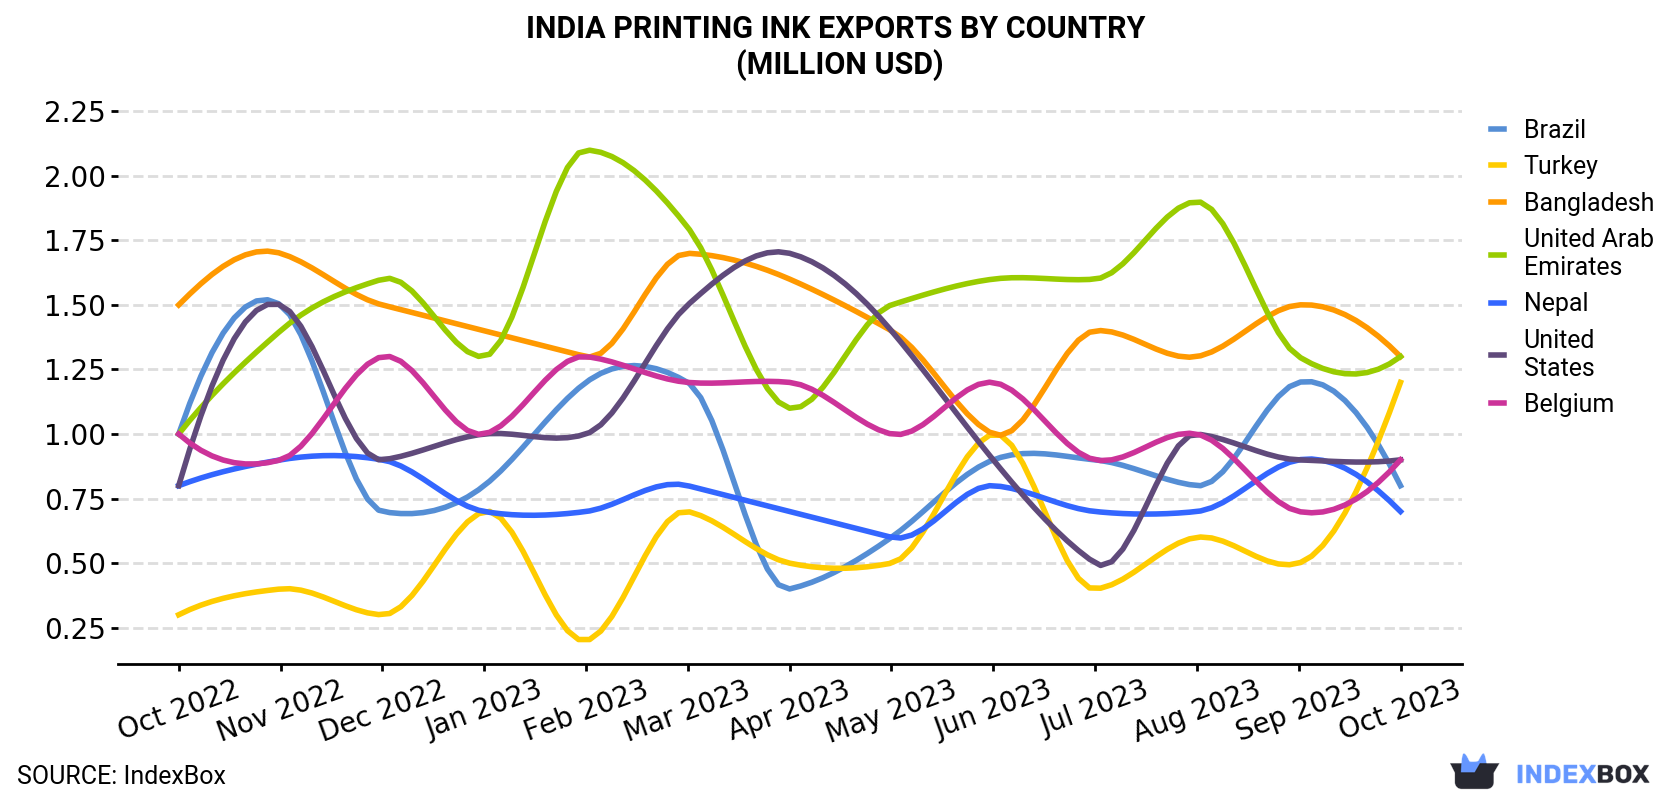 India Printing Ink Exports By Country (Million USD)